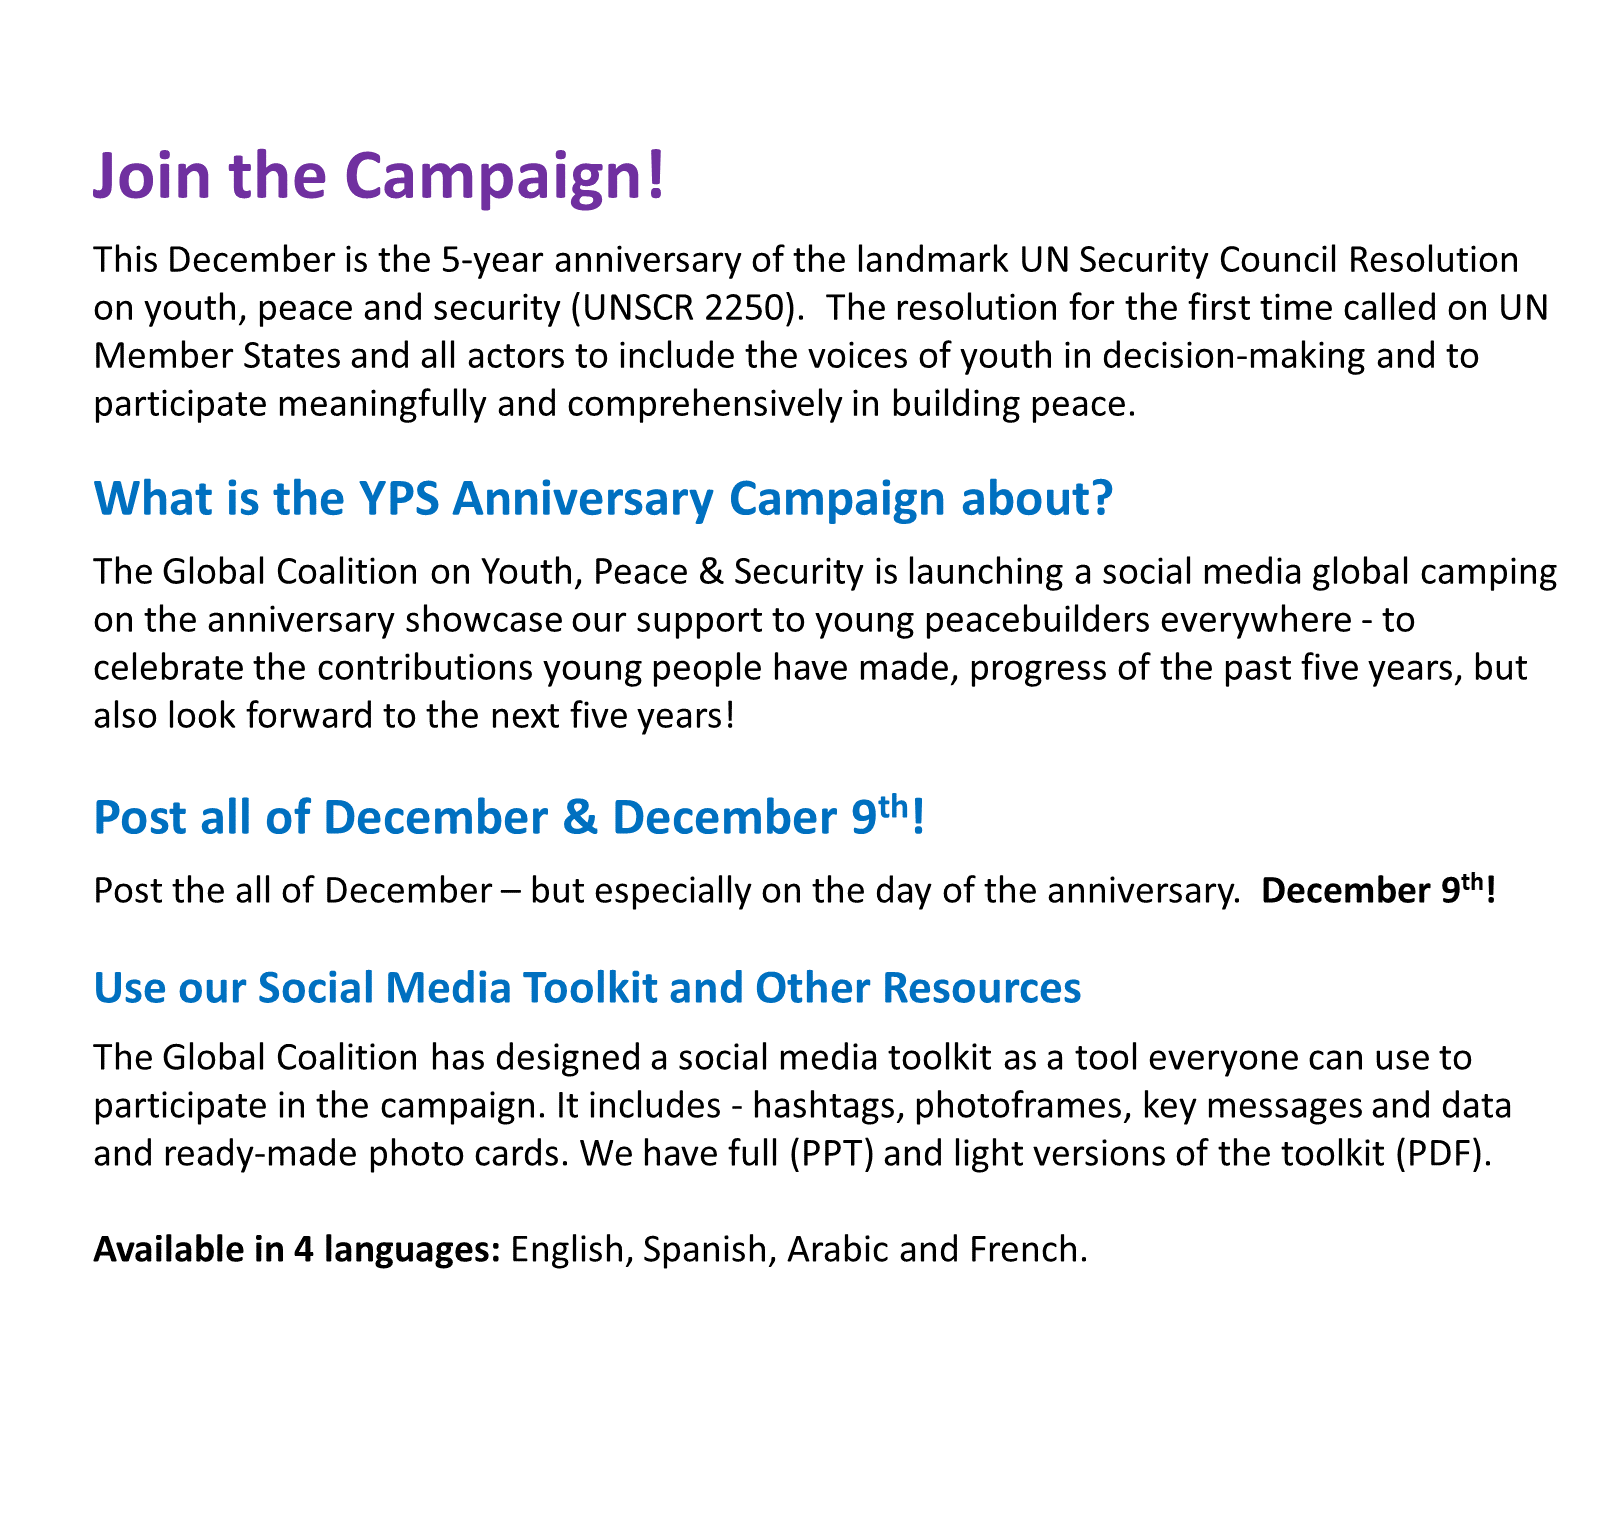 Join our campaign!